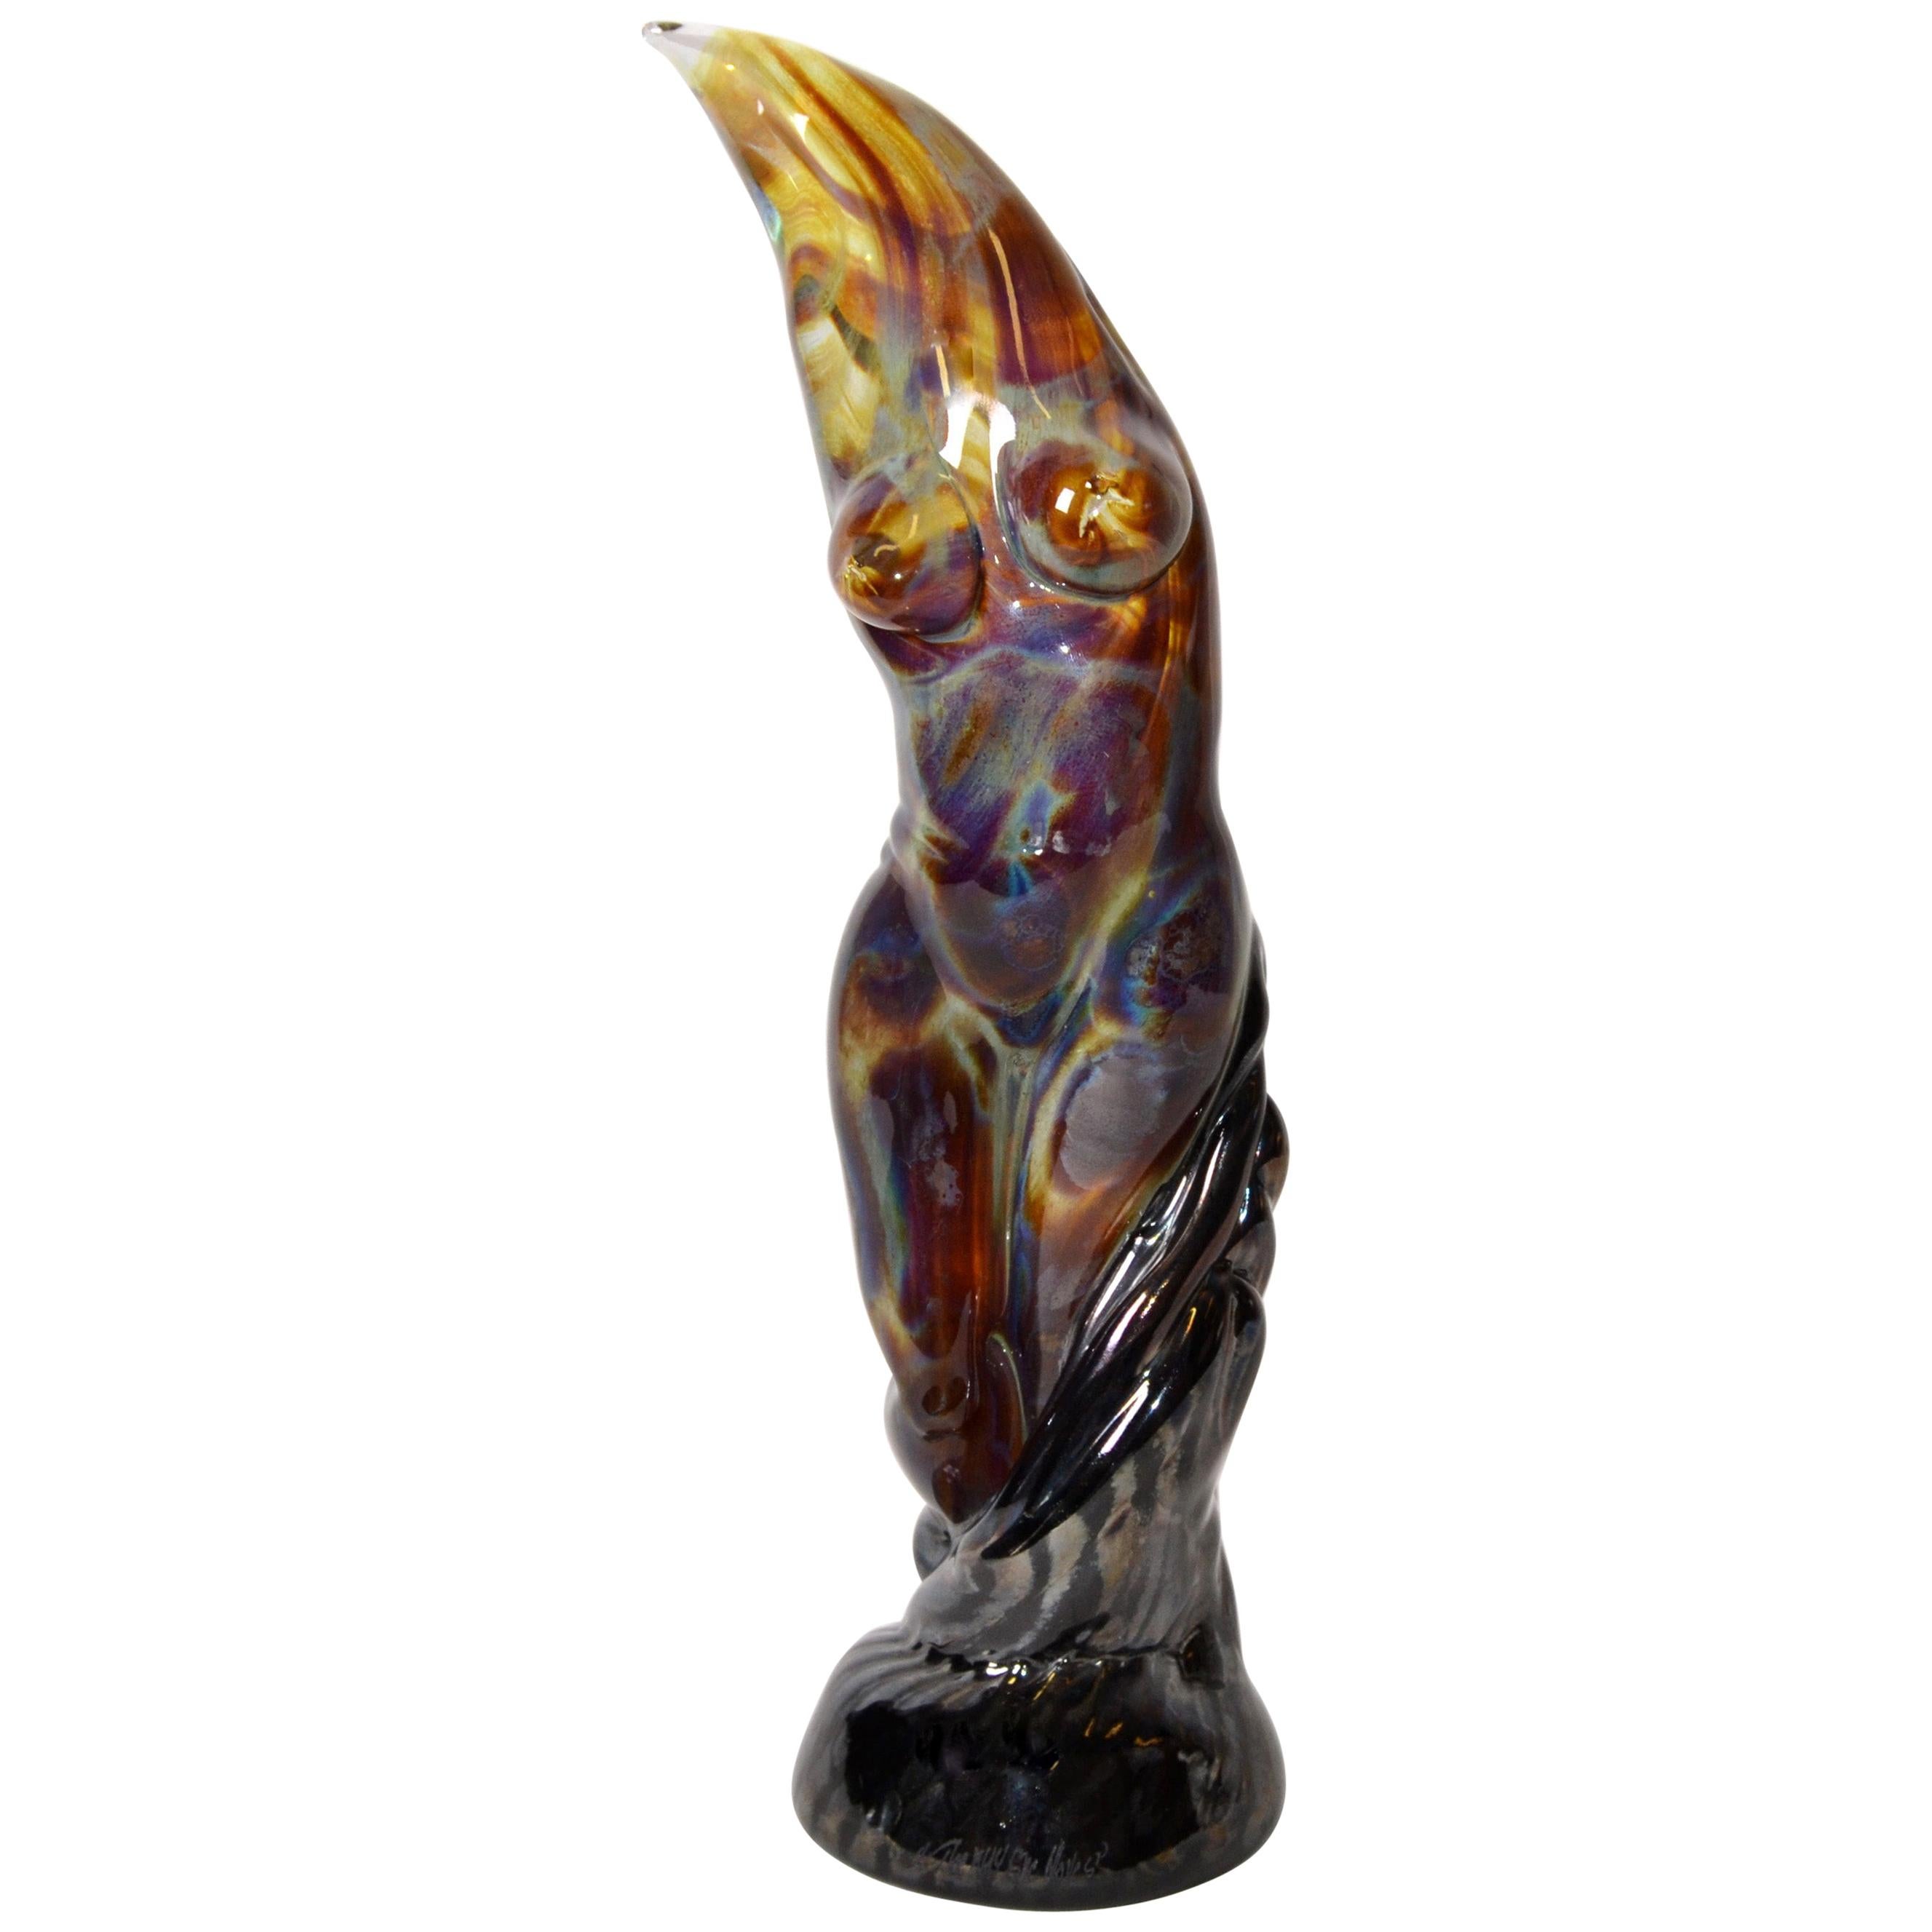 Modern Art Glass Sculpture Nude Woman Titled The Way She Moves Signed Michael